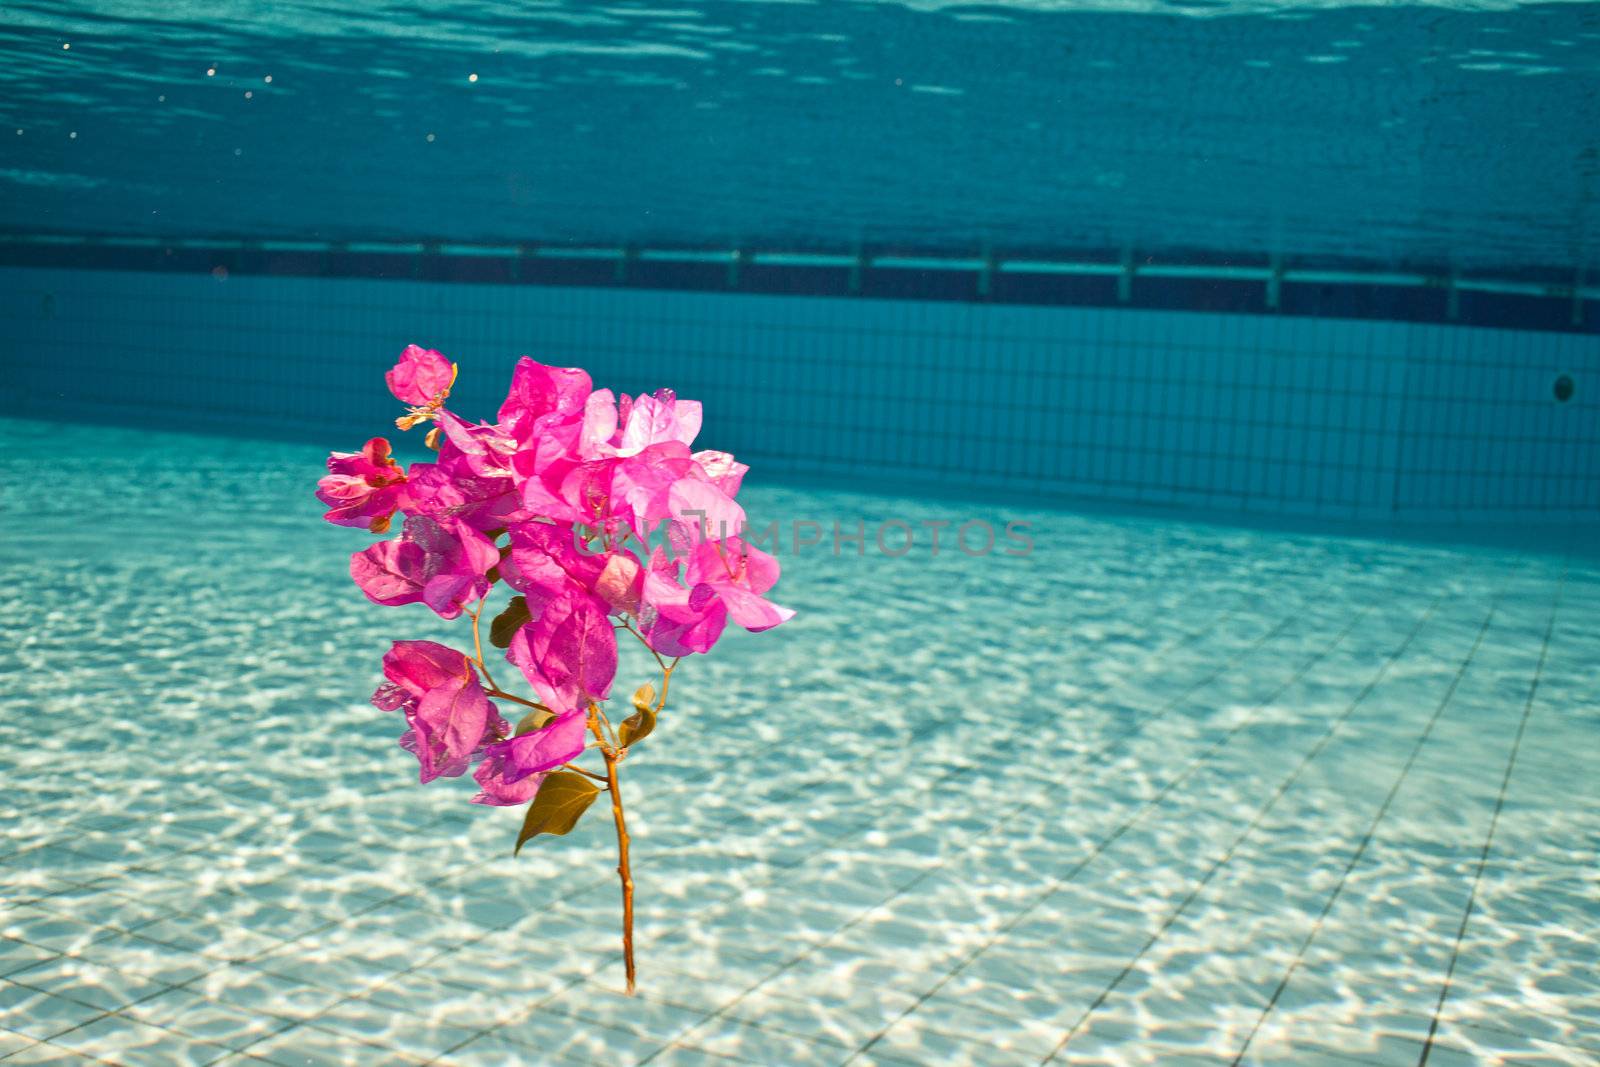 a flower under the water in swimming pool